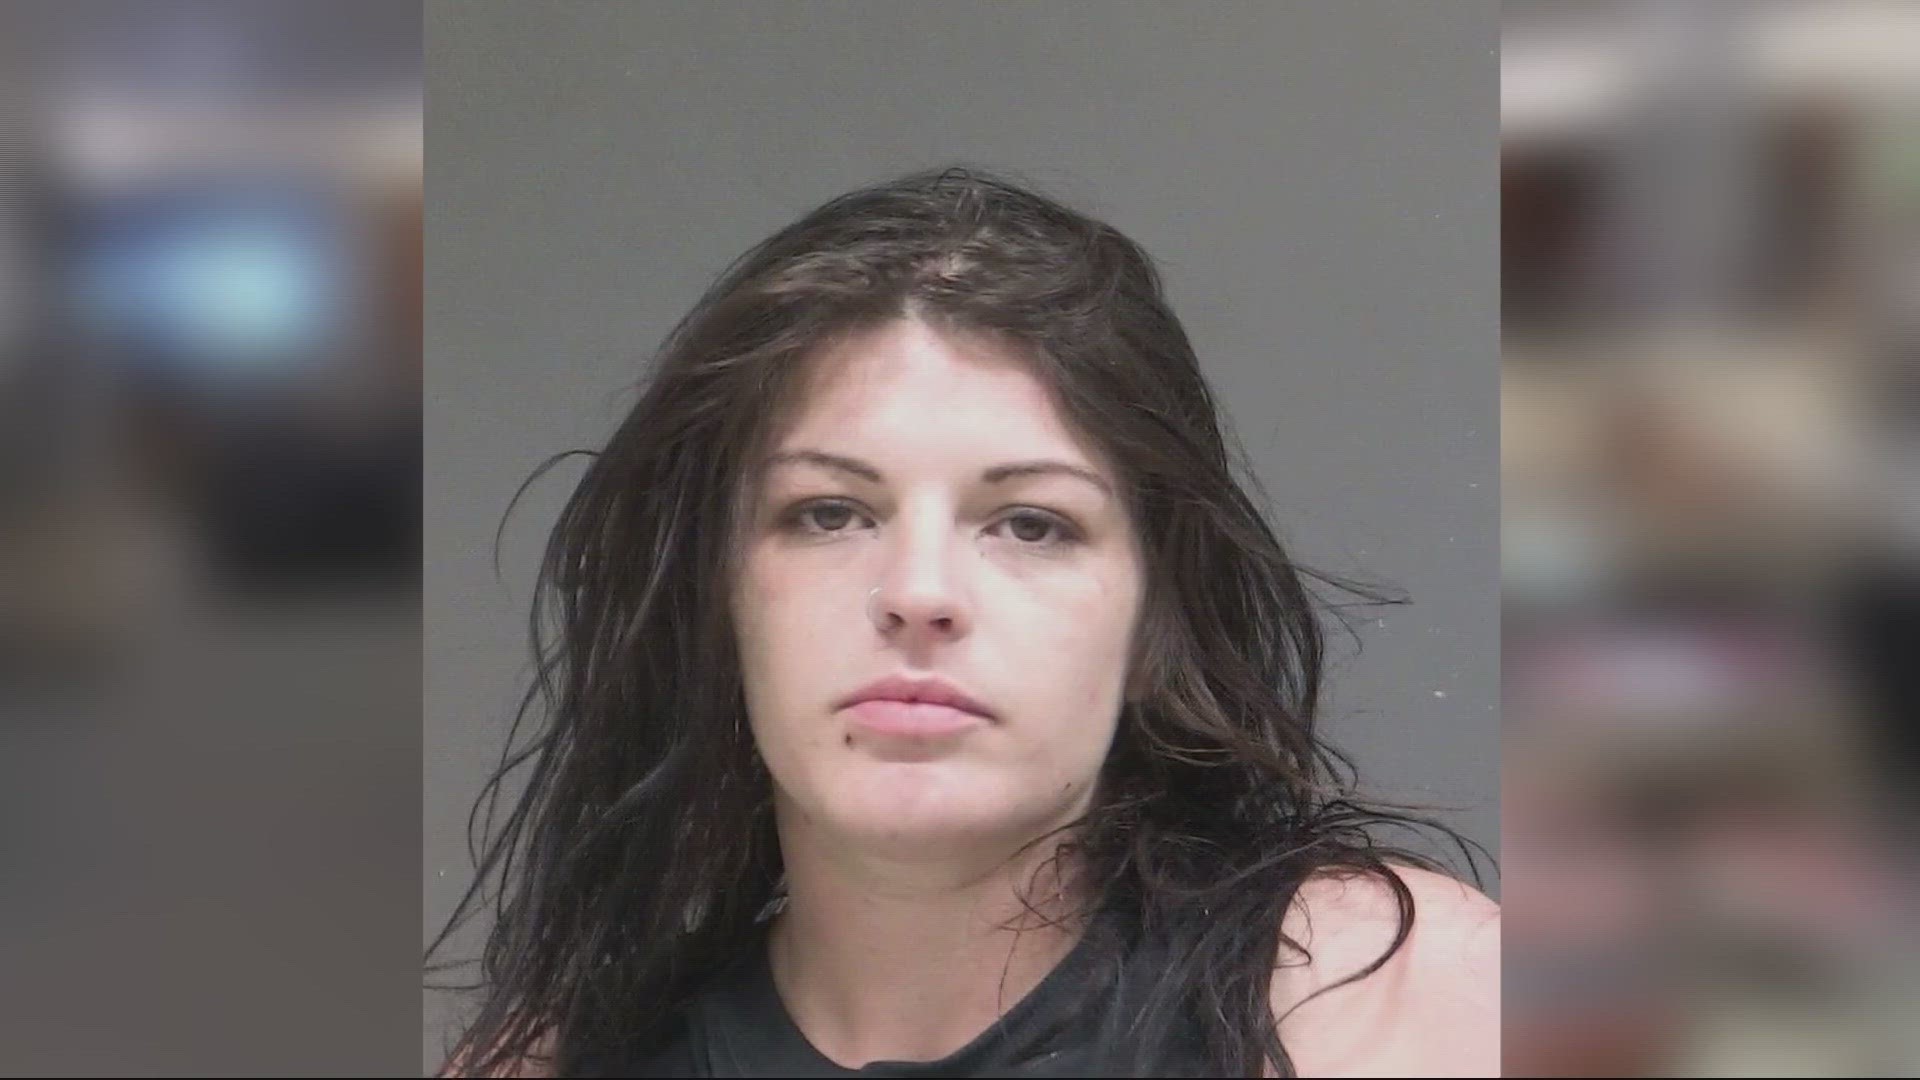 The woman pled guilty to assault and attempted robbery and was sentenced to 70 months. The victim went to the hospital but her earlobe could not be reattached.